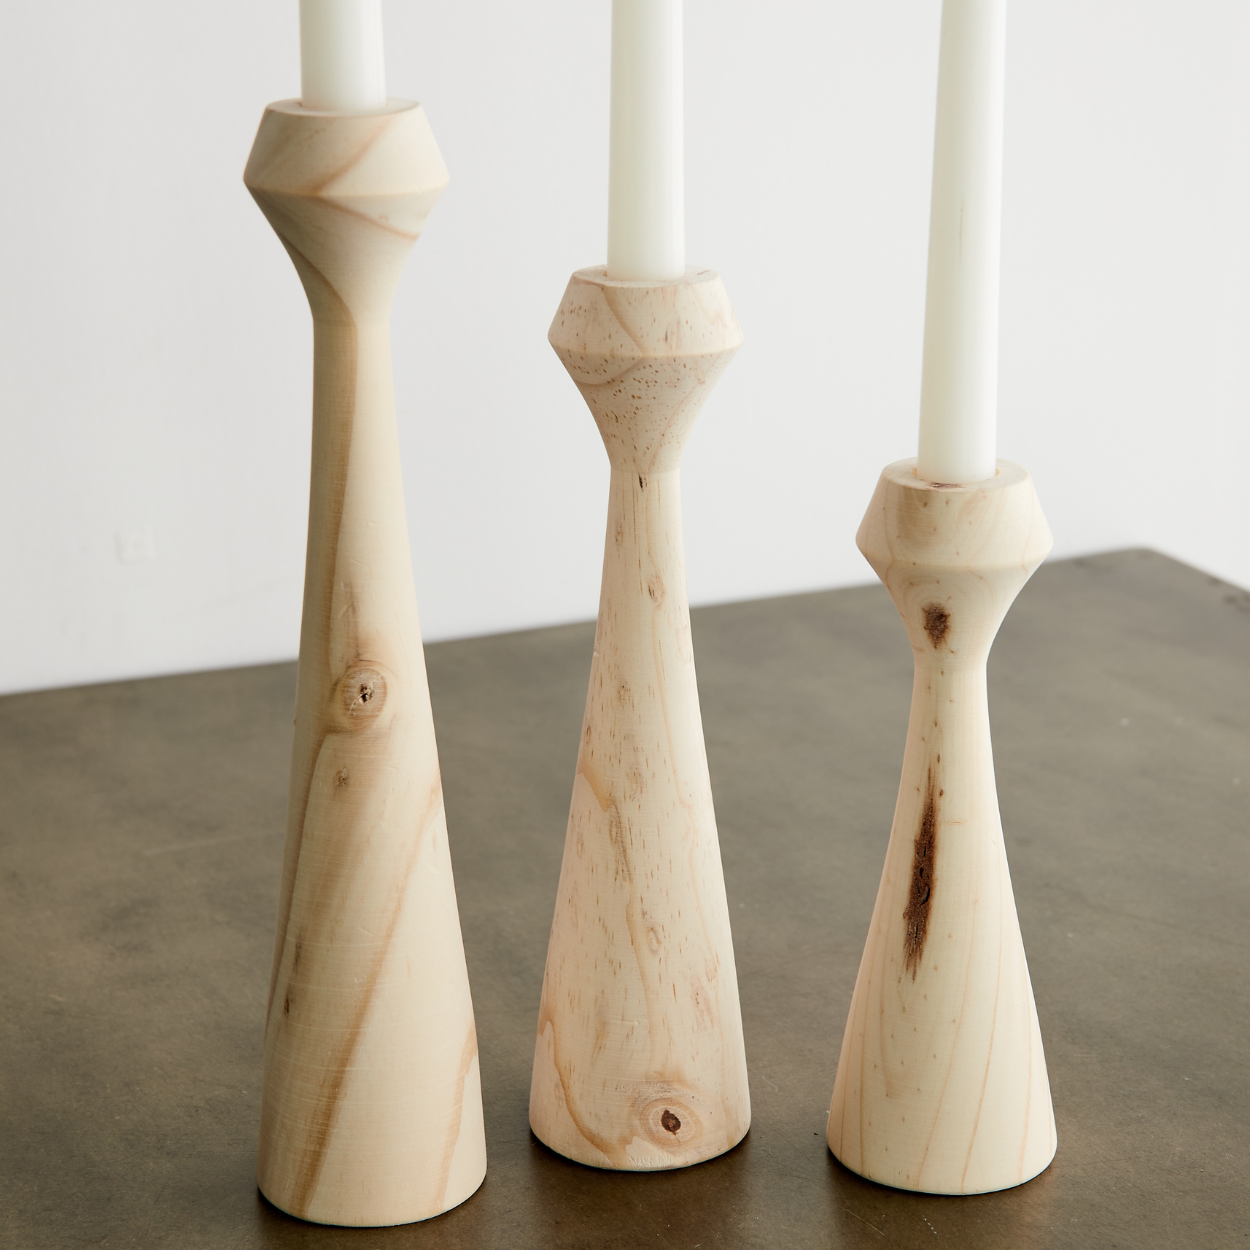  Wood Candle Holders for Taper Candlesticks - 3 Pack 